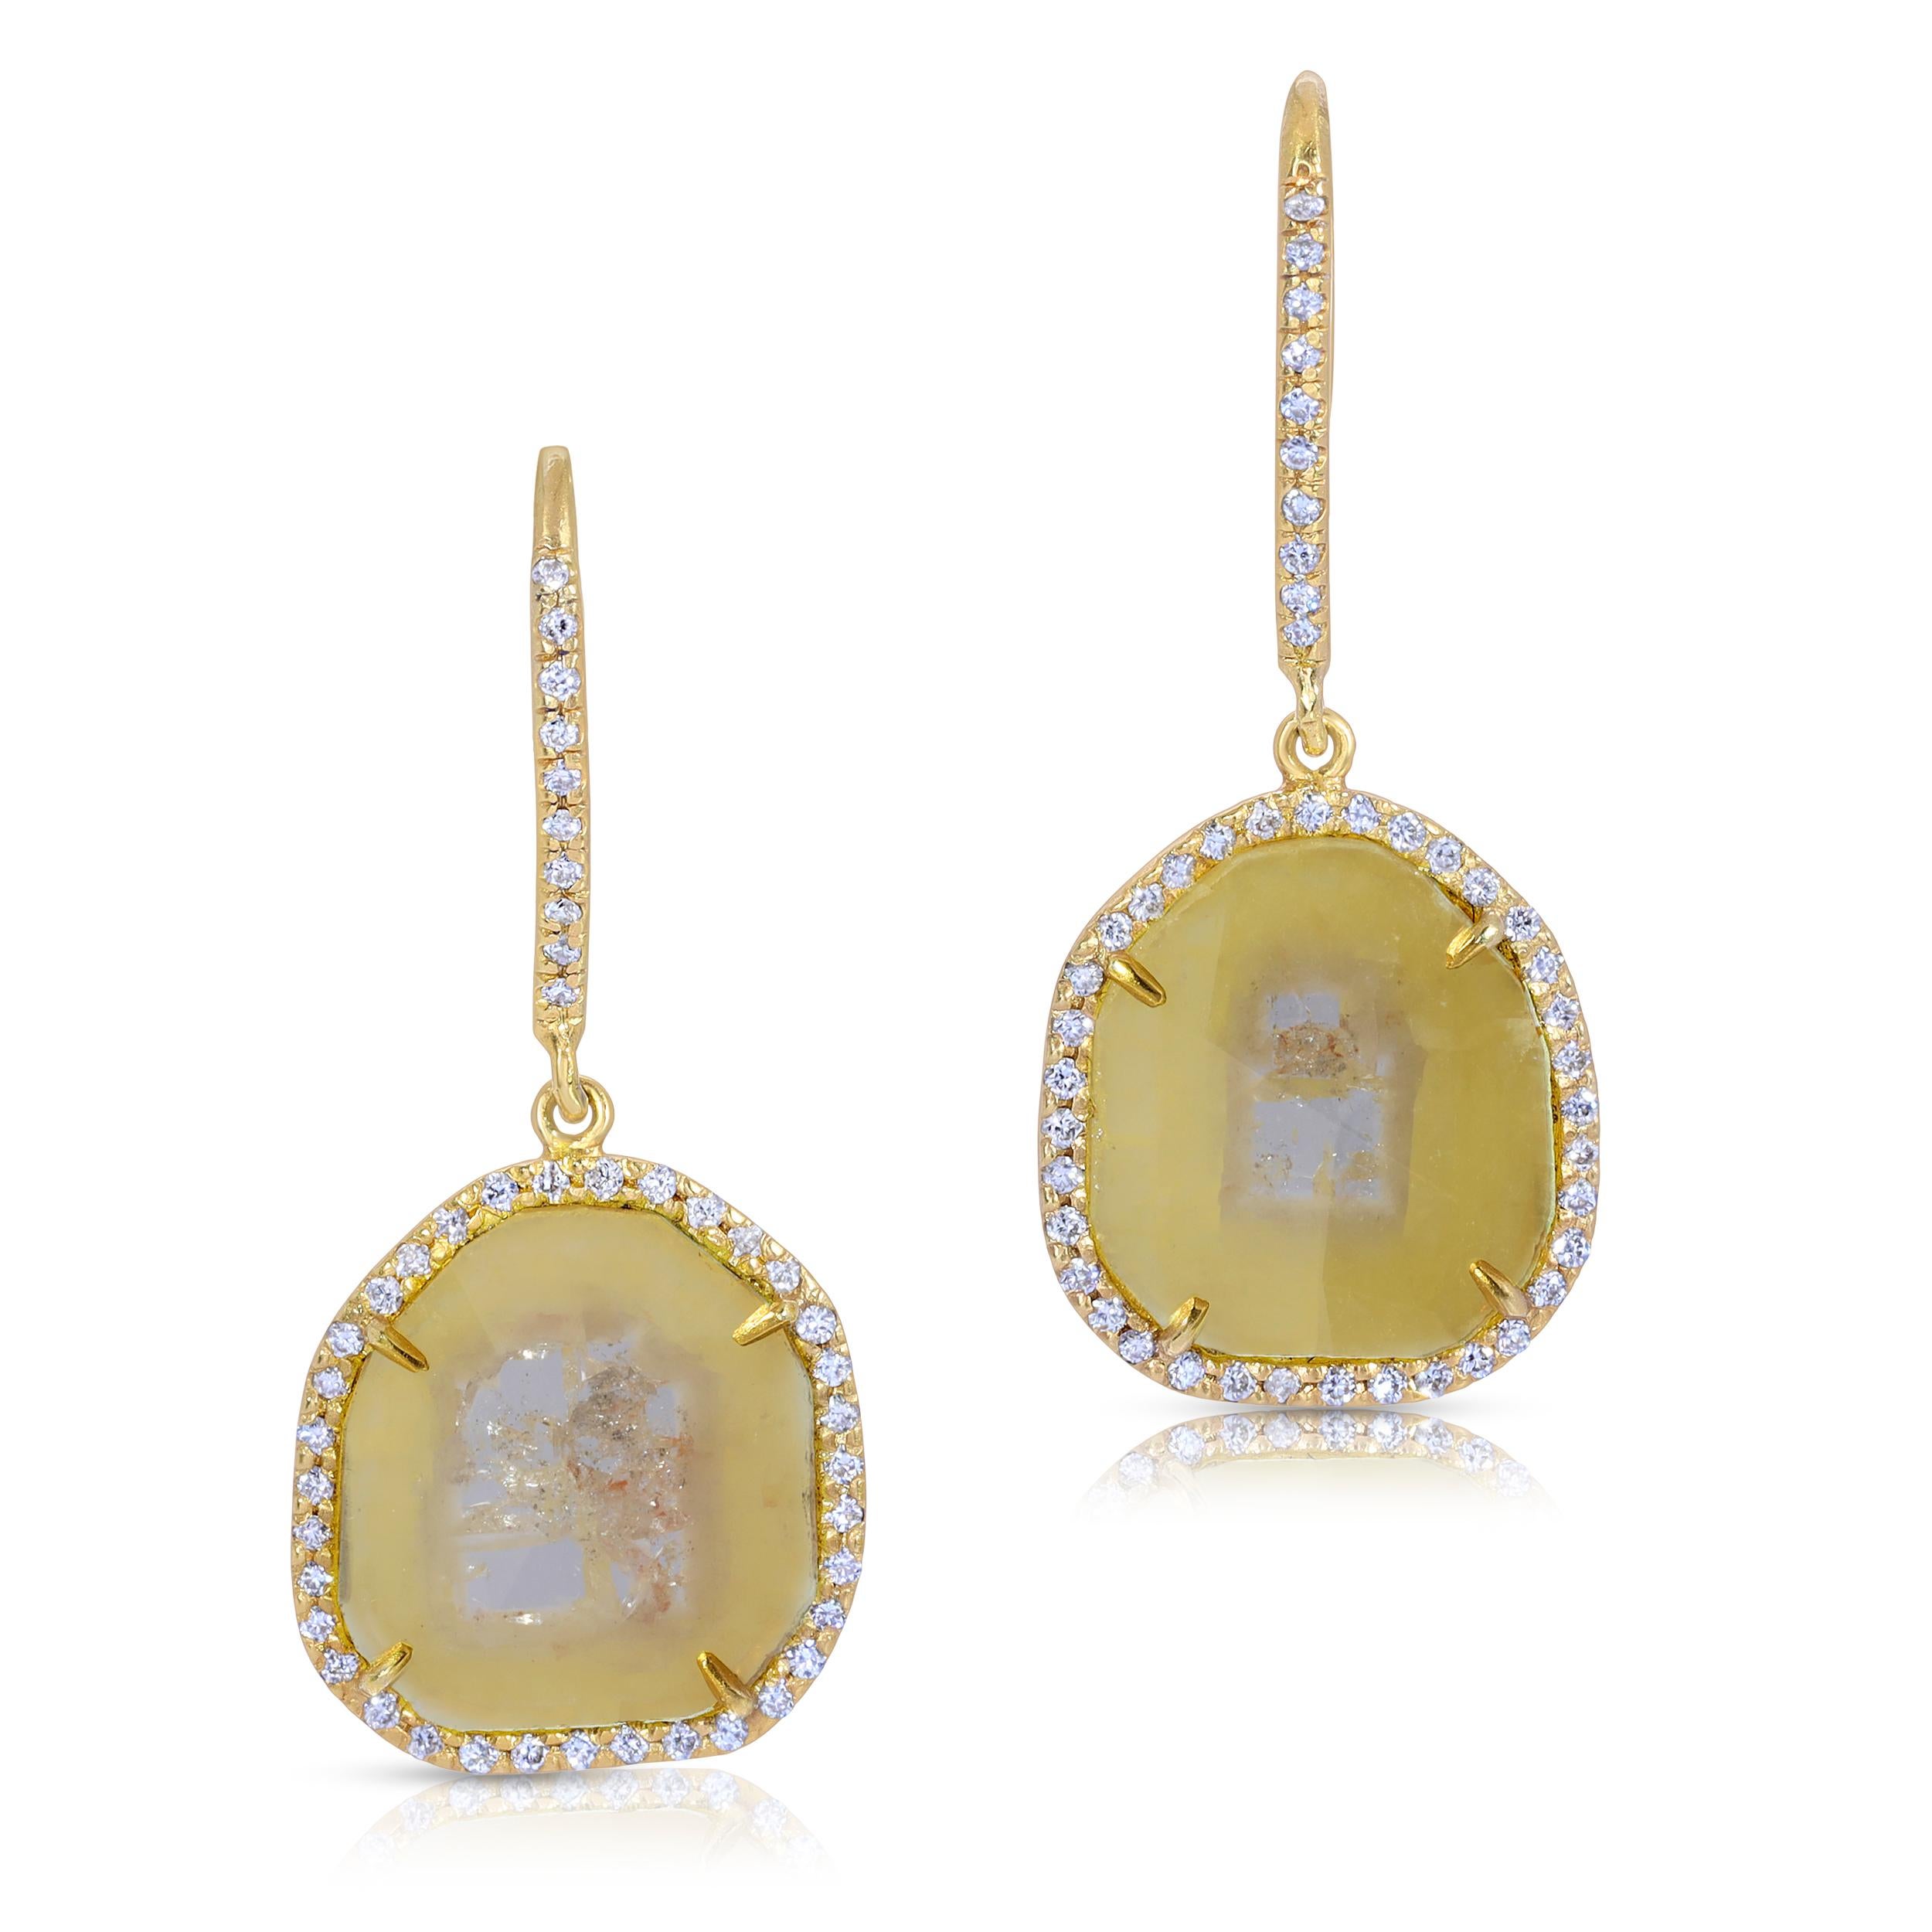 3.92ct Clear Yellow Diamond Slices with .45ct vs quality Diamond Pave in 18k Yellow Gold with Diamond Pave French clips. Handmade in Los Angeles. All Diamonds are ethically sourced  